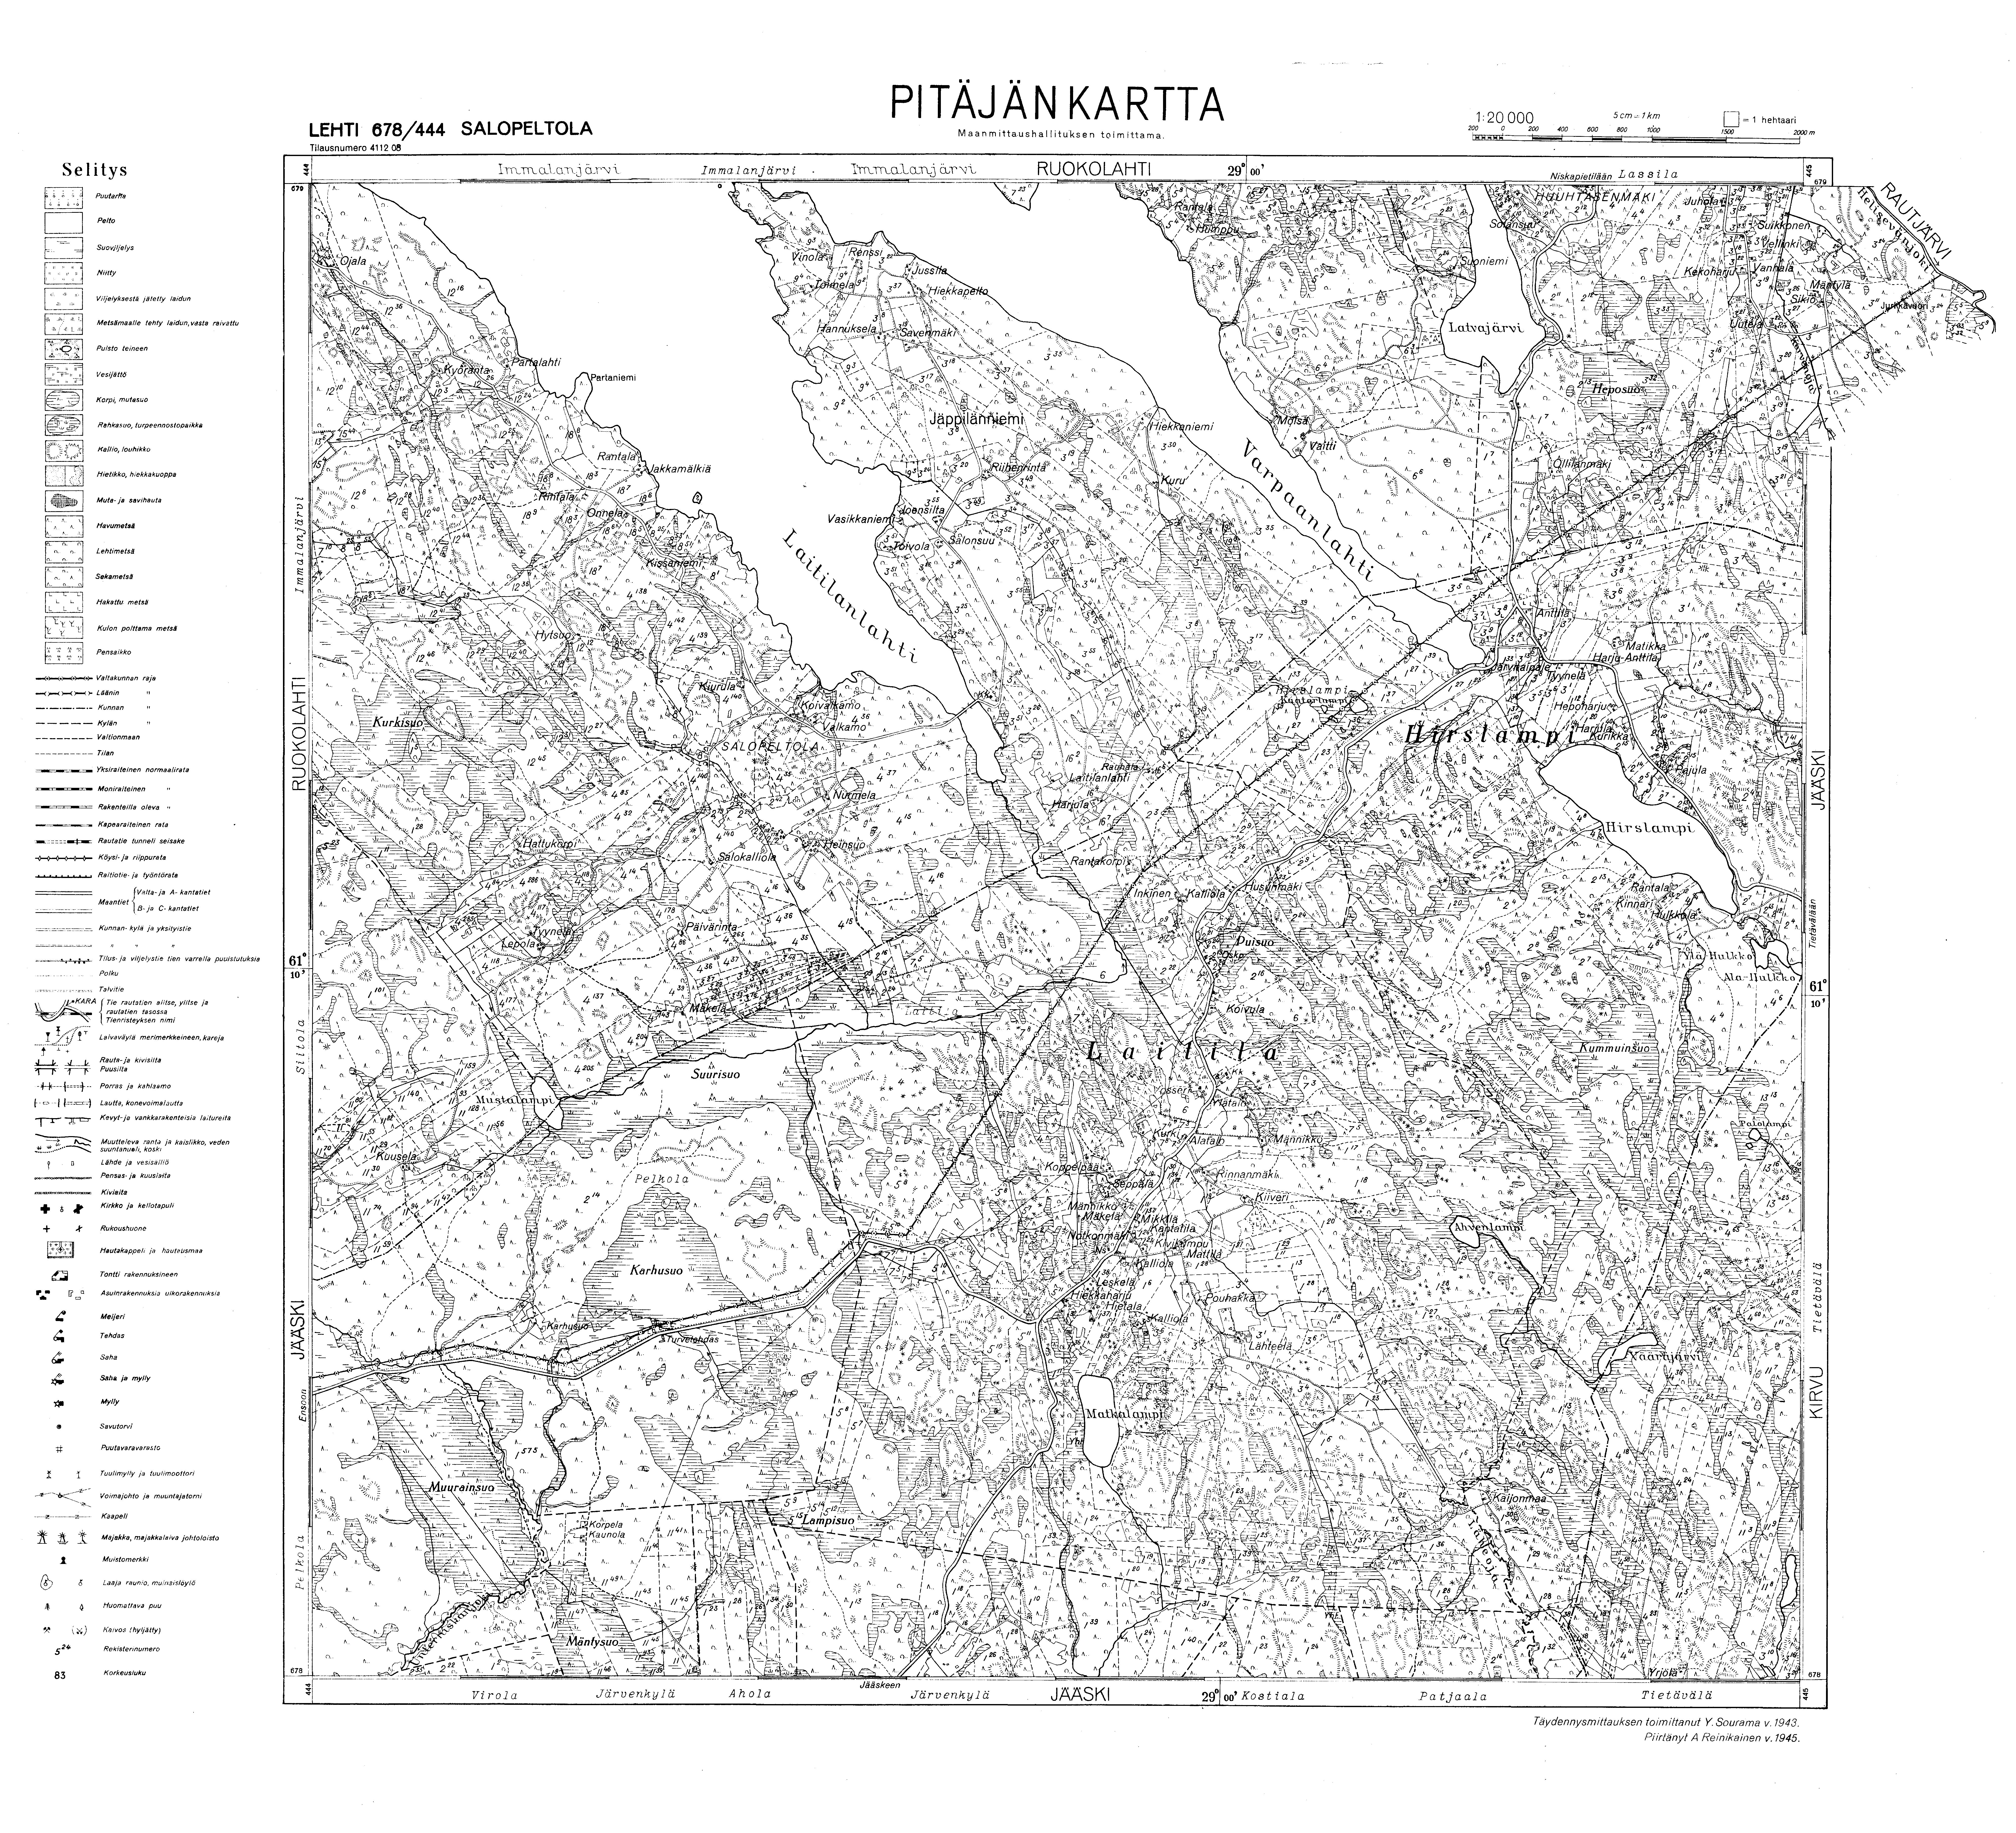 Salopeltola. Pitäjänkartta 411208. Parish map from 1945. Use the zooming tool to explore in higher level of detail. Obtain as a quality print or high resolution image